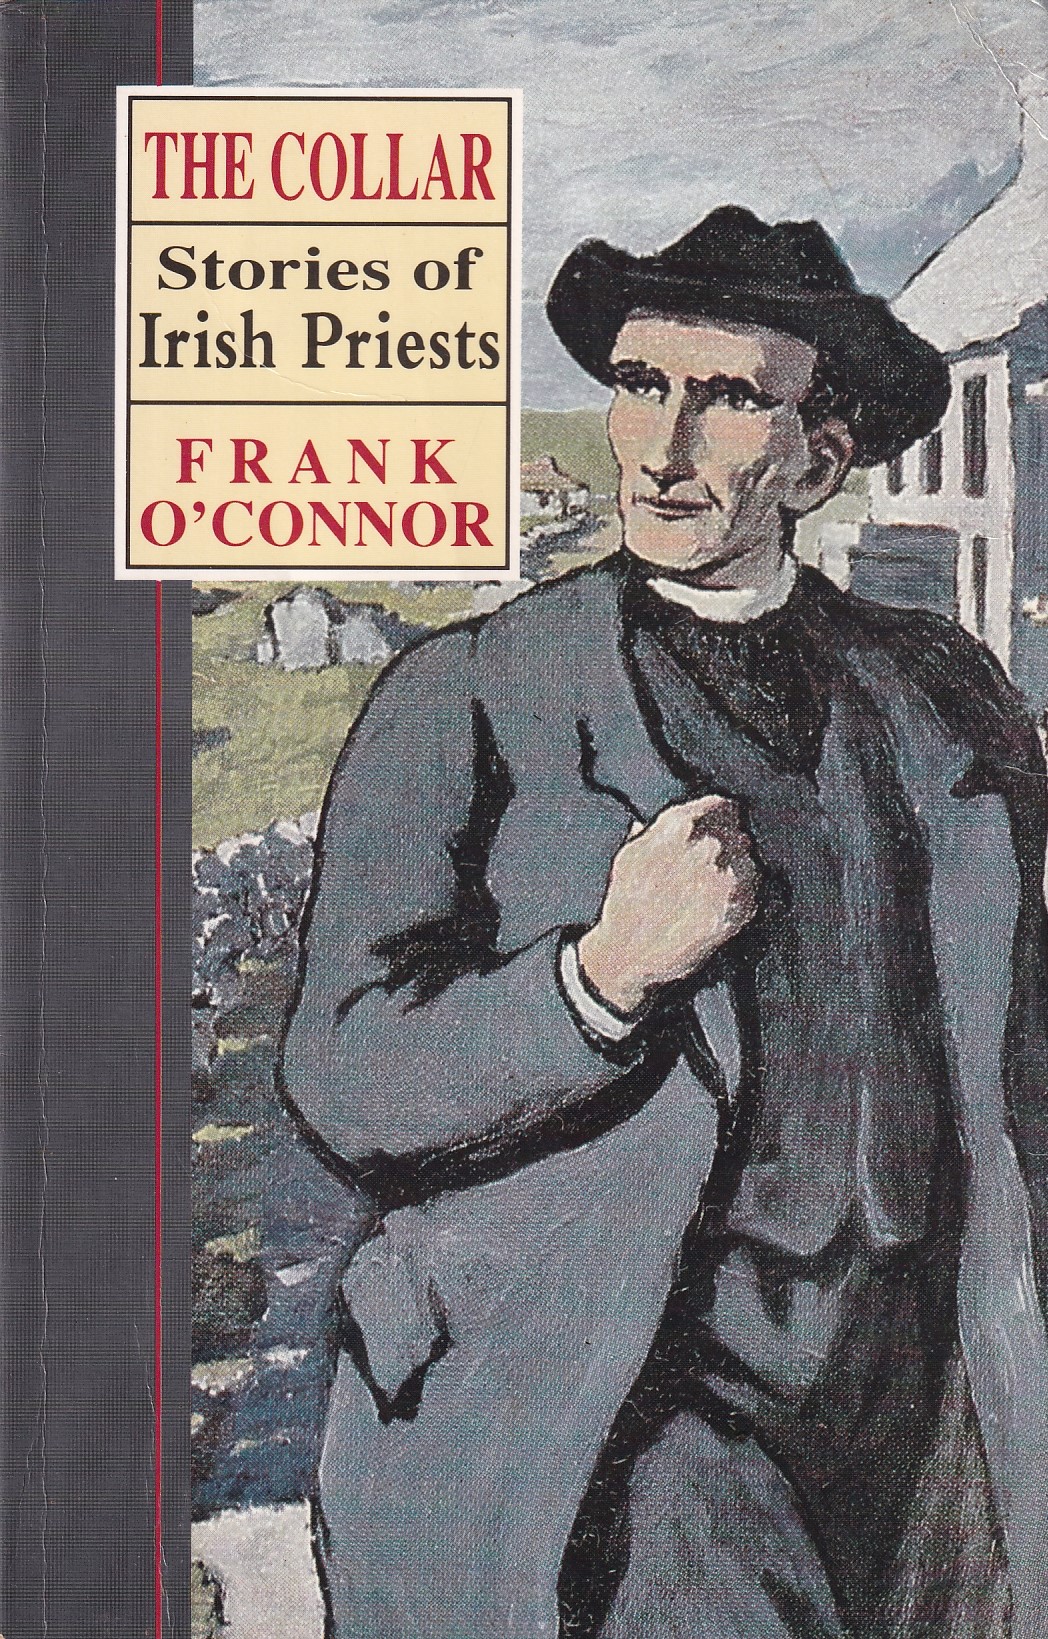 The Collar: Stories of Irish Priests by Frank O'Conner